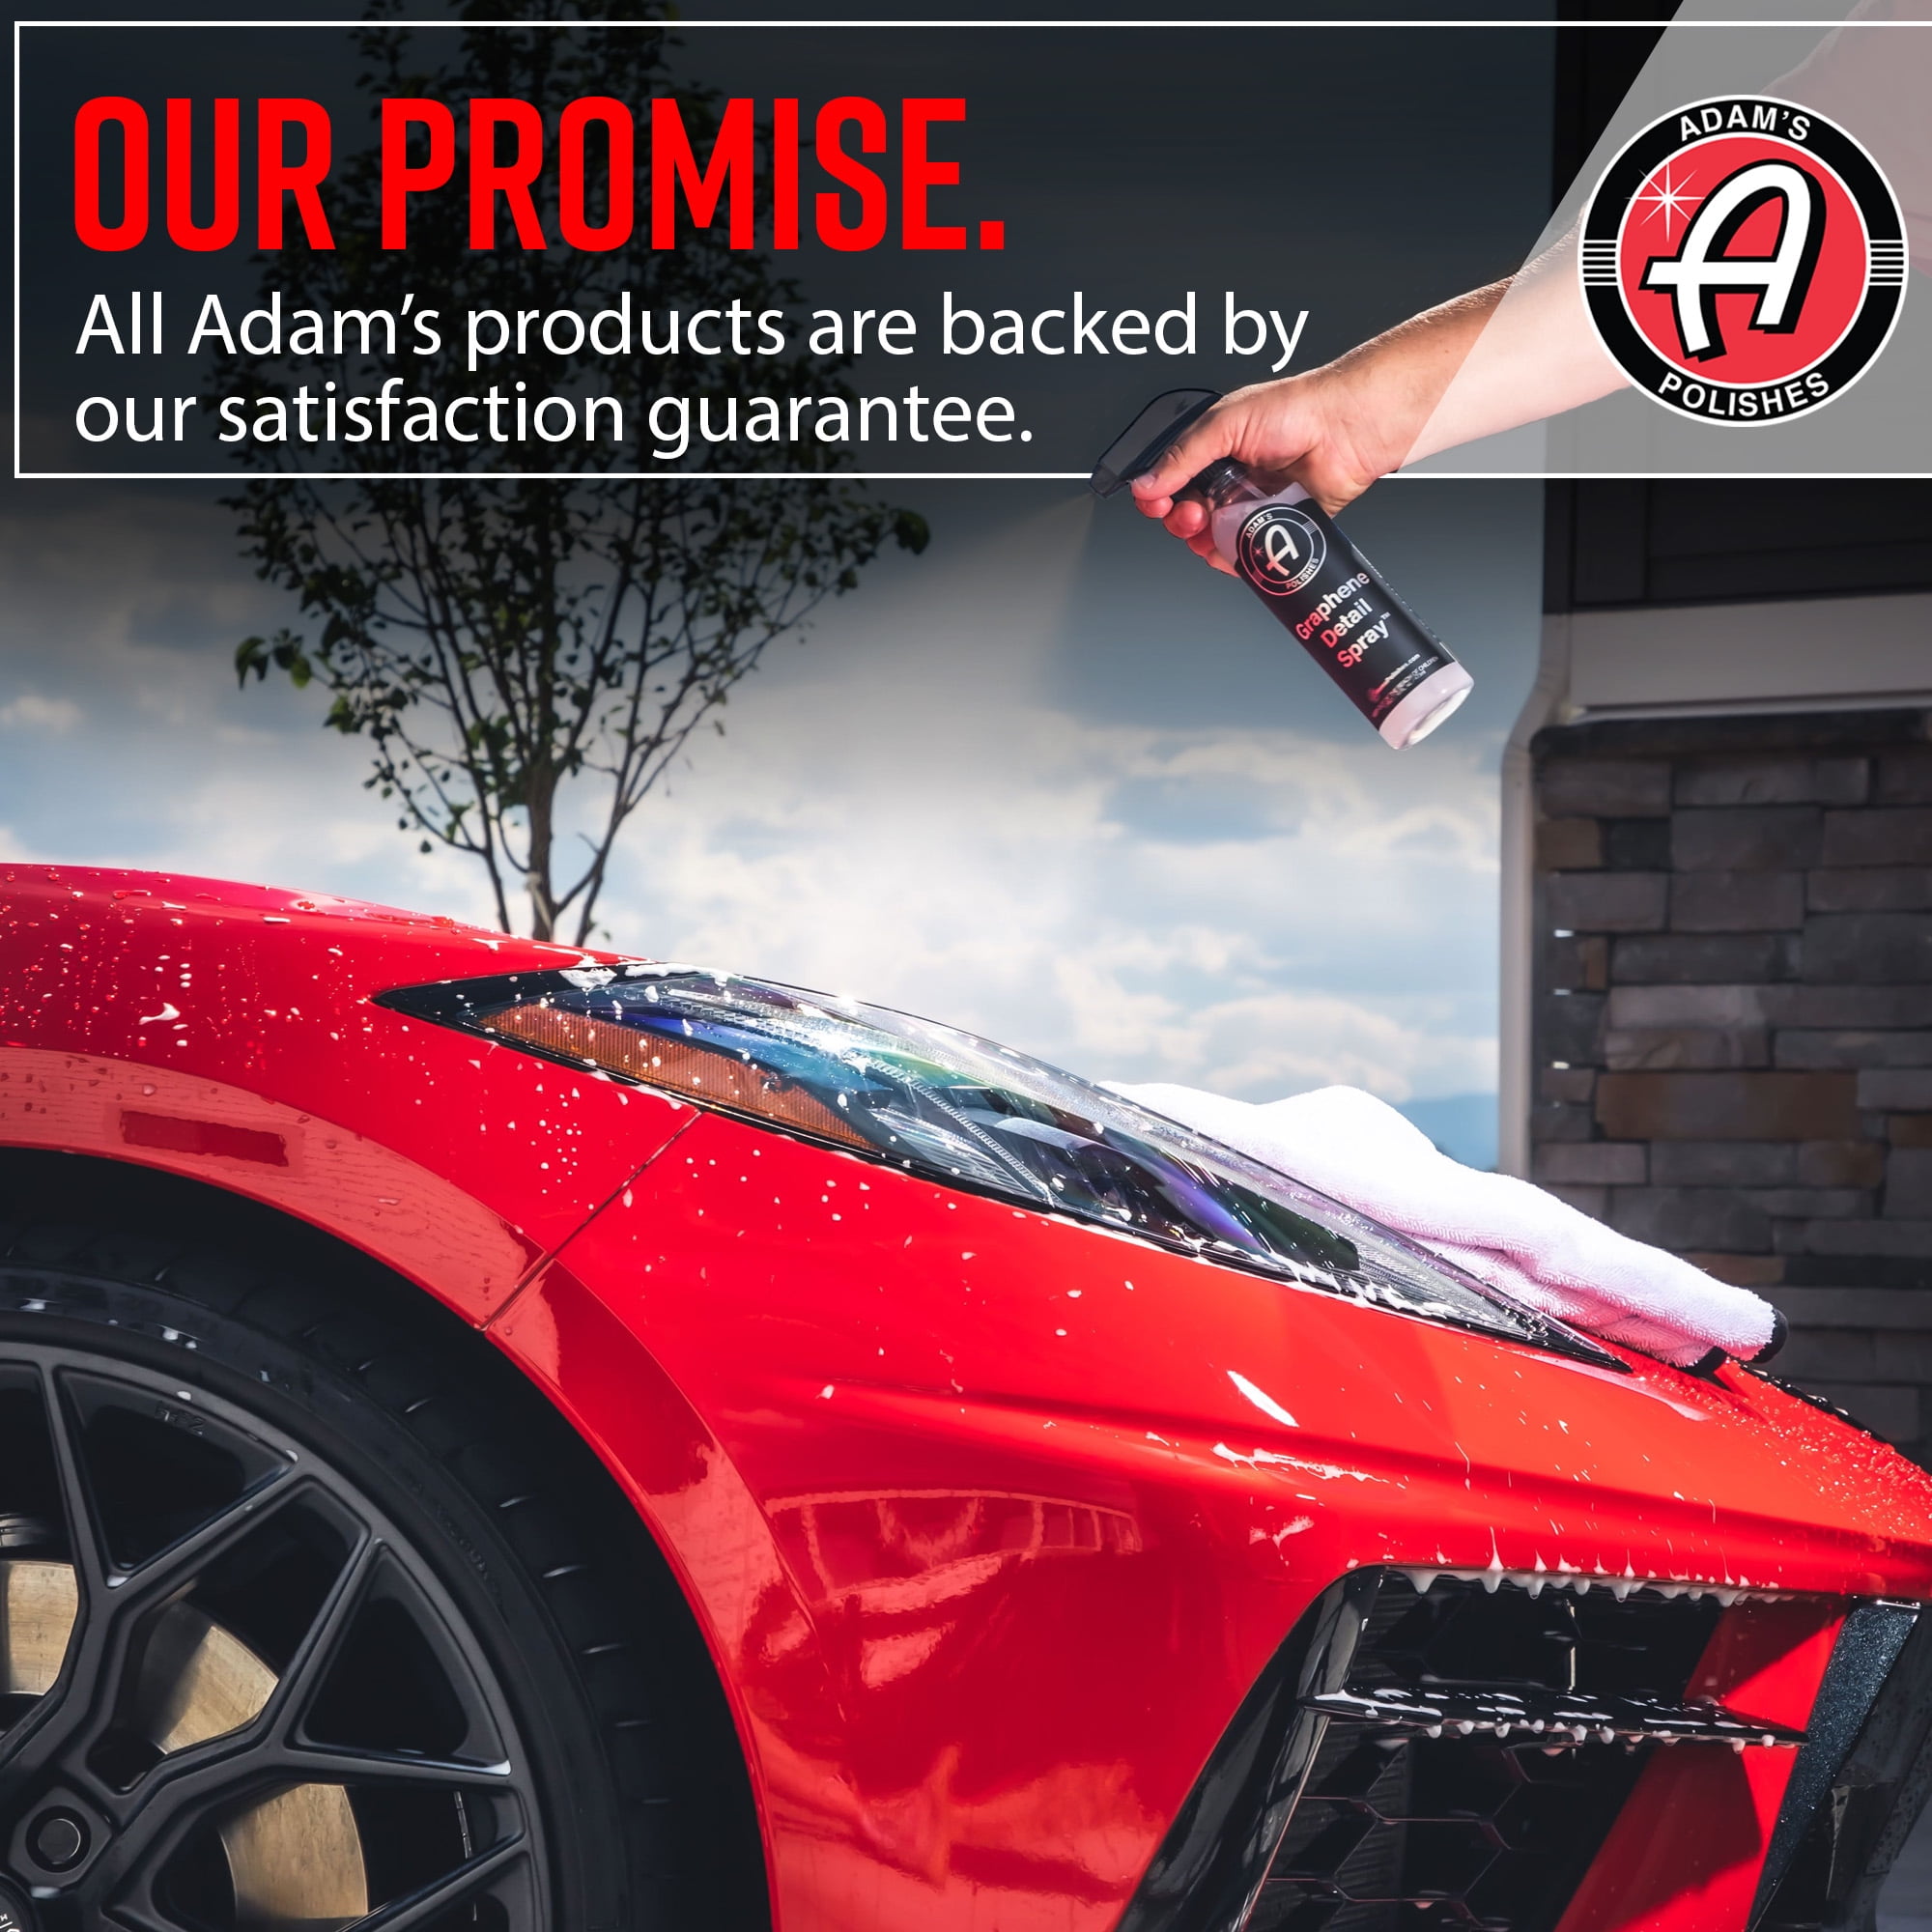 Blog: Graphene Ceramic Coating™ Explained - The Adam's Detailing Library -  Adams Forums